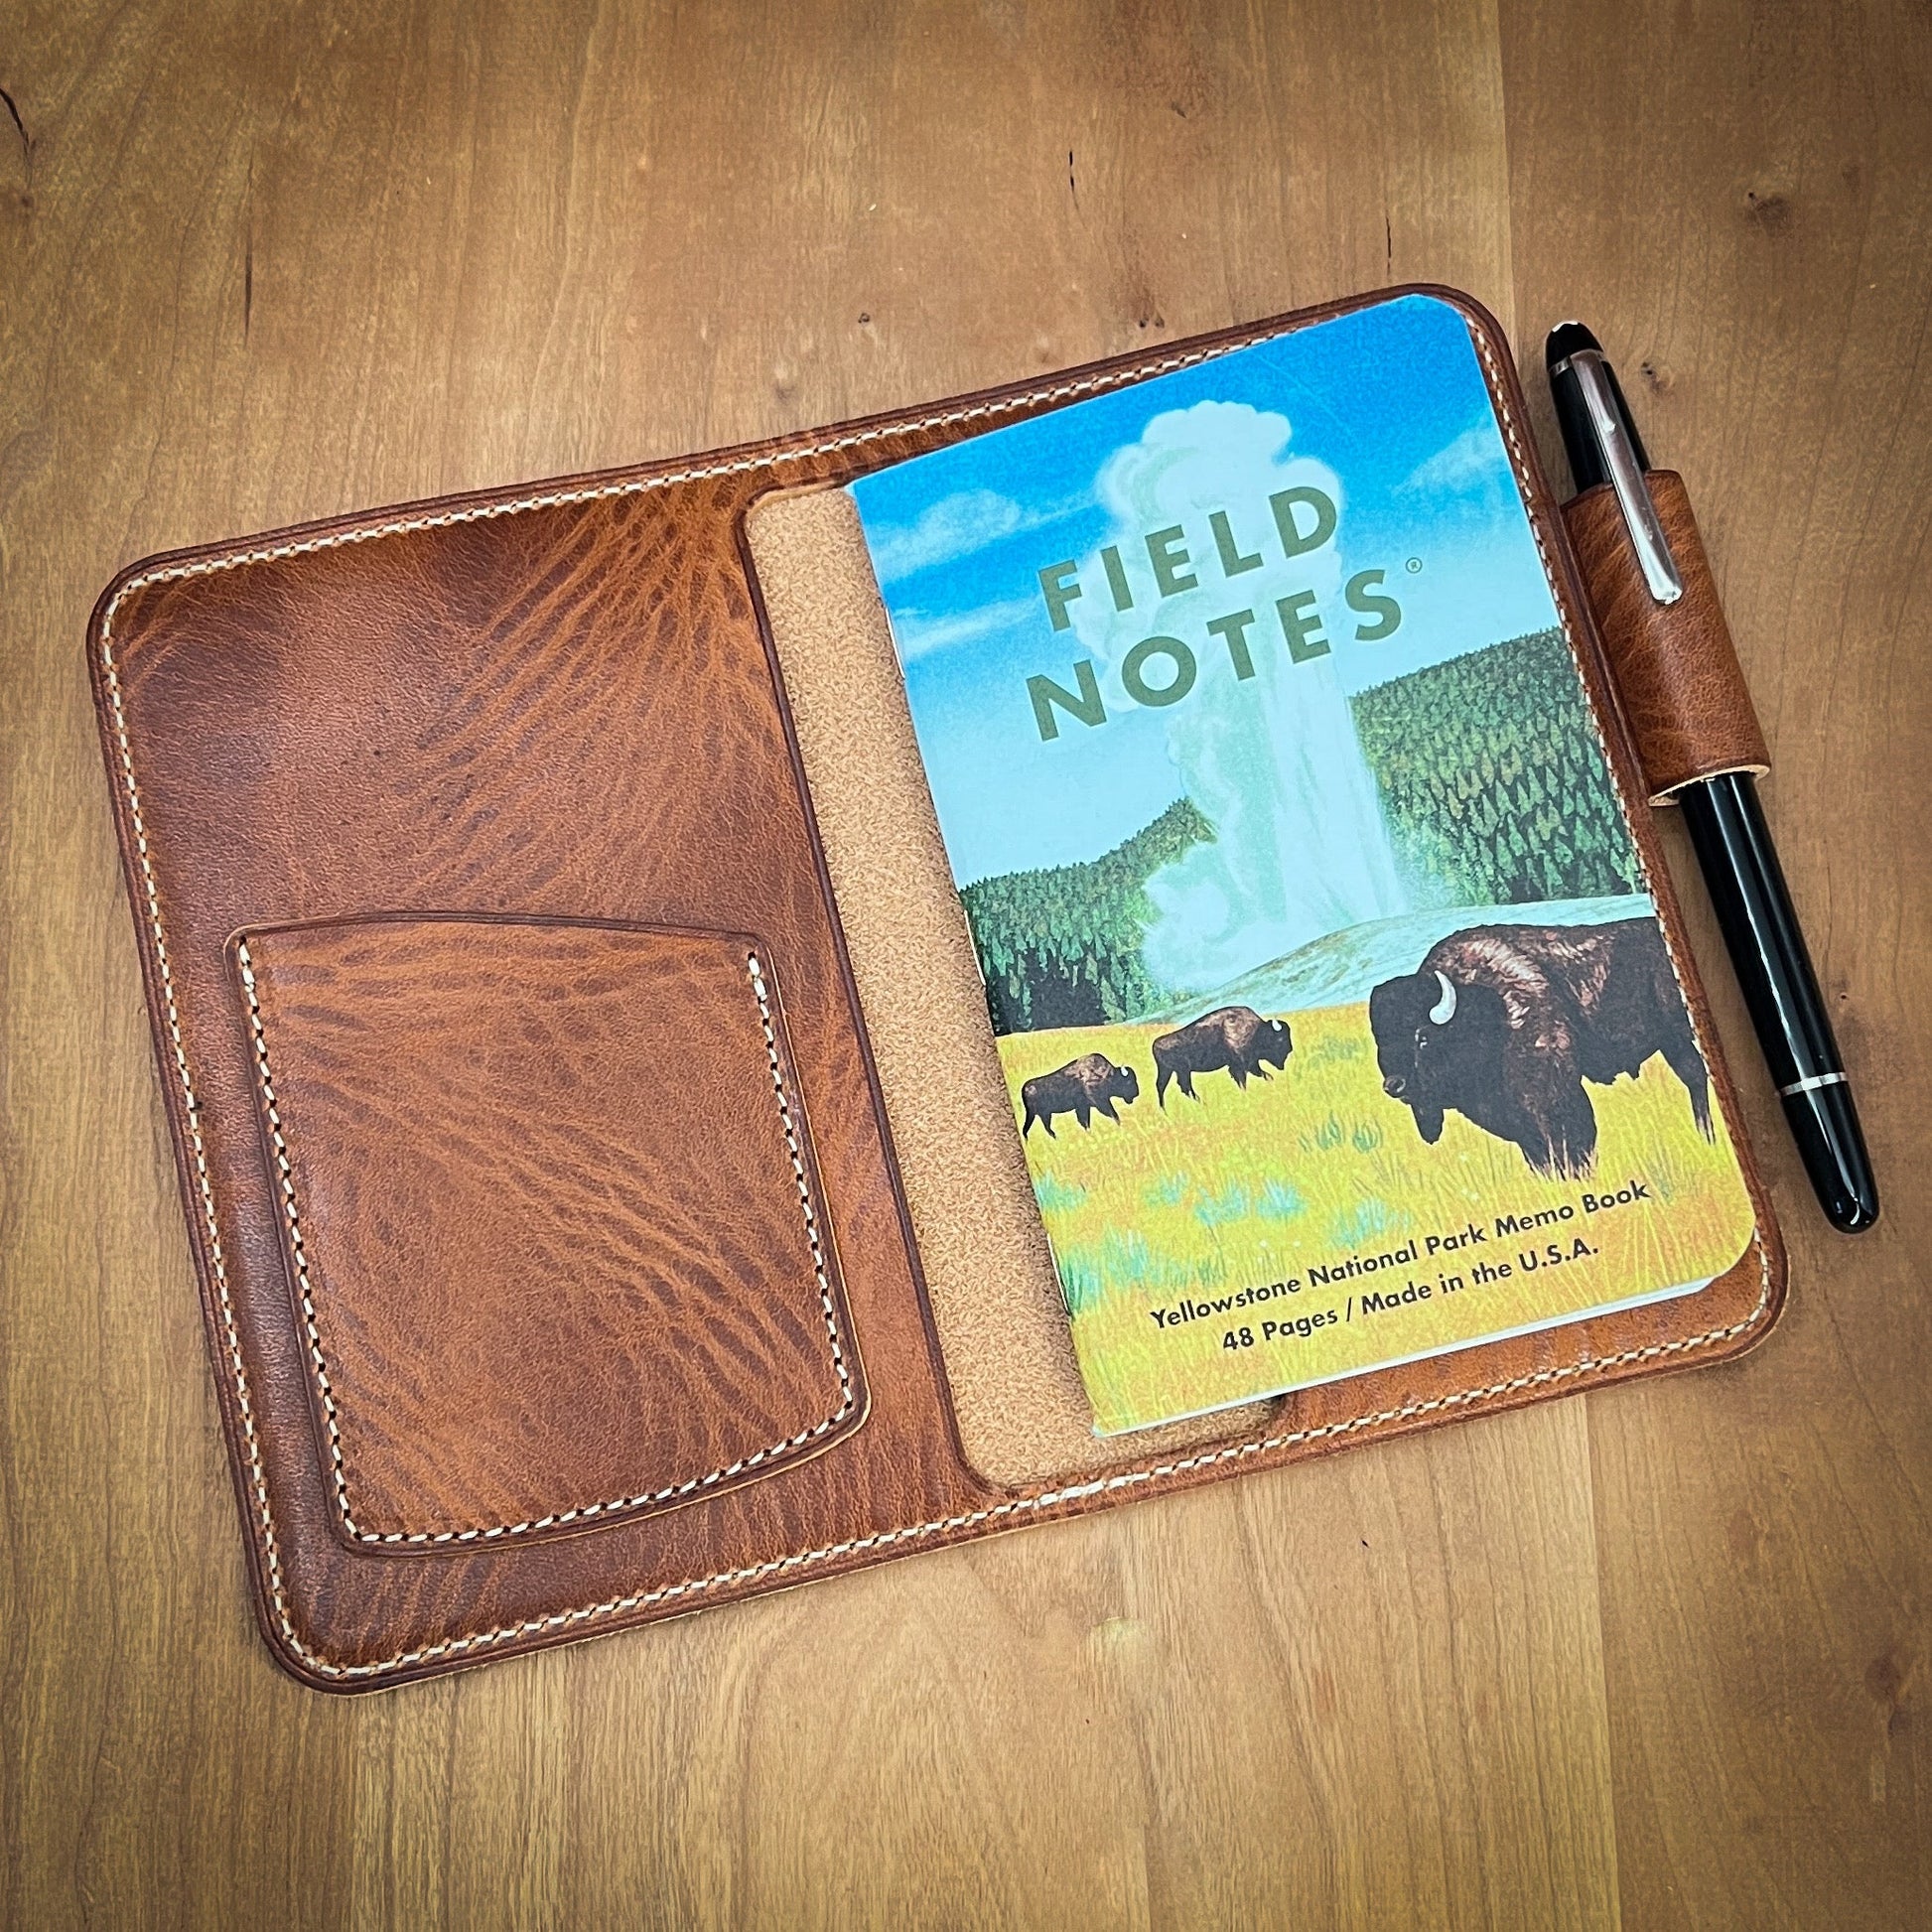 English Tan Leather Field Notes Cover with Beige Stitching and Montblanc Pen in Pen Holder